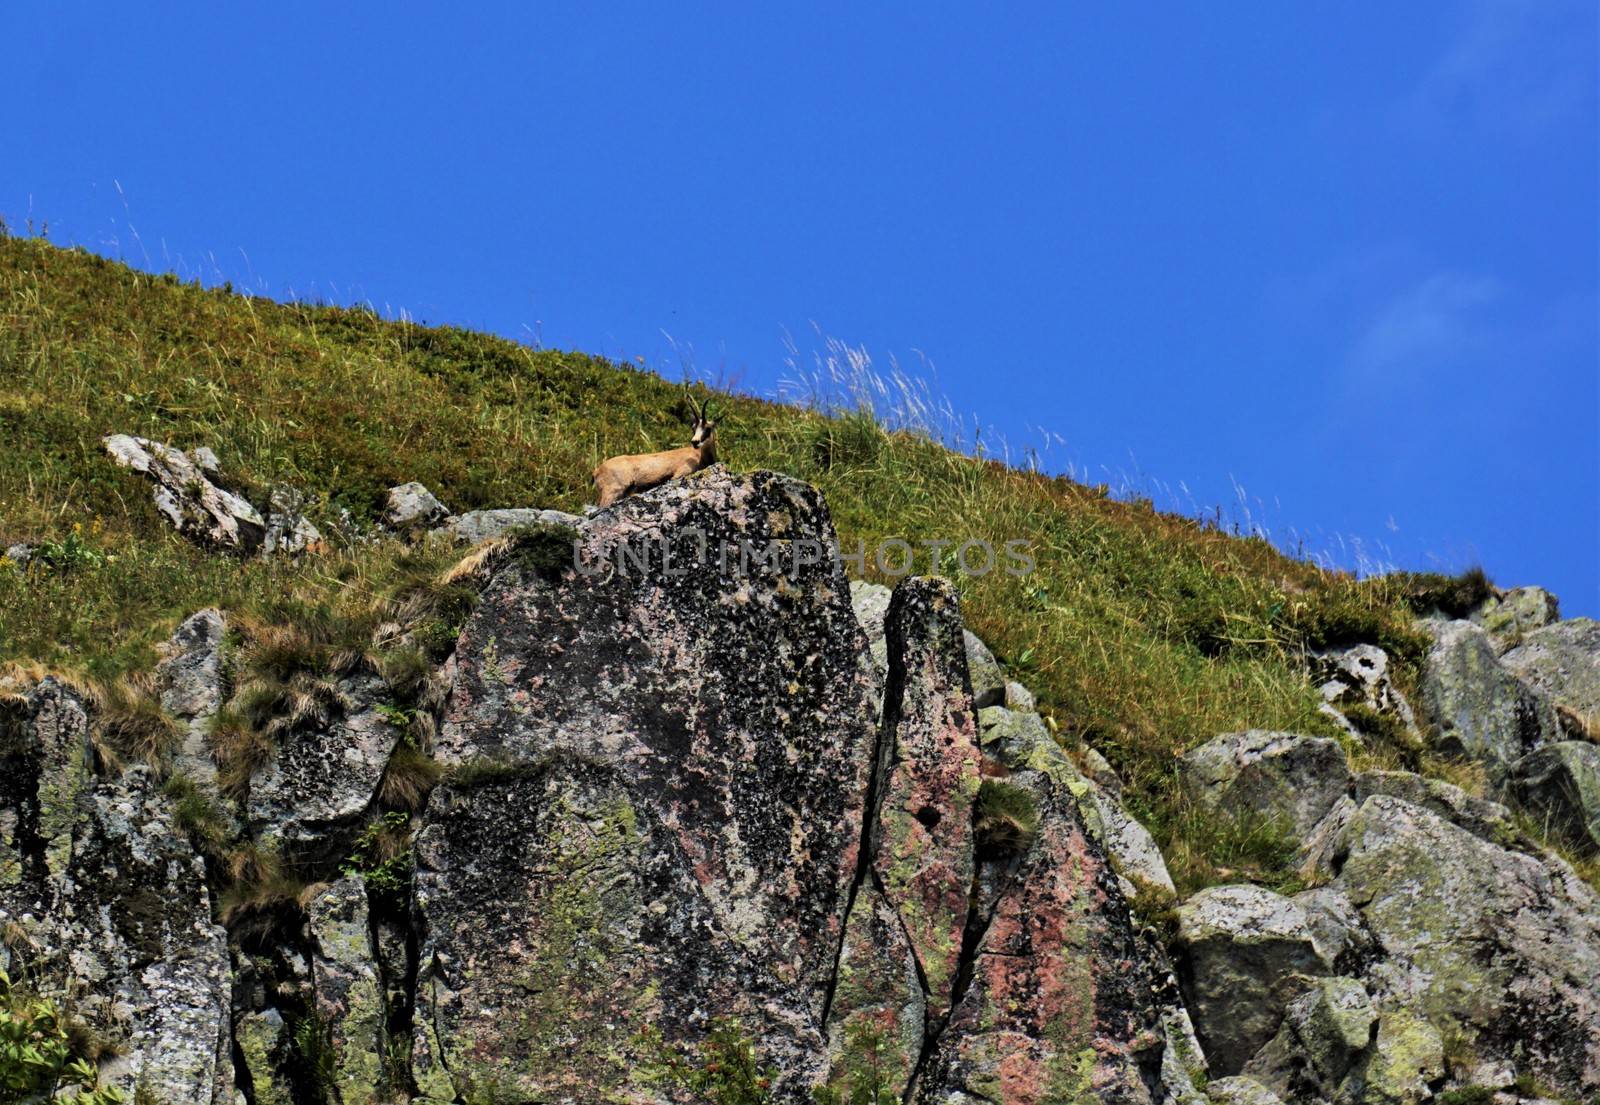 Close-up of a Chamois on a cliff in the Vosges, France